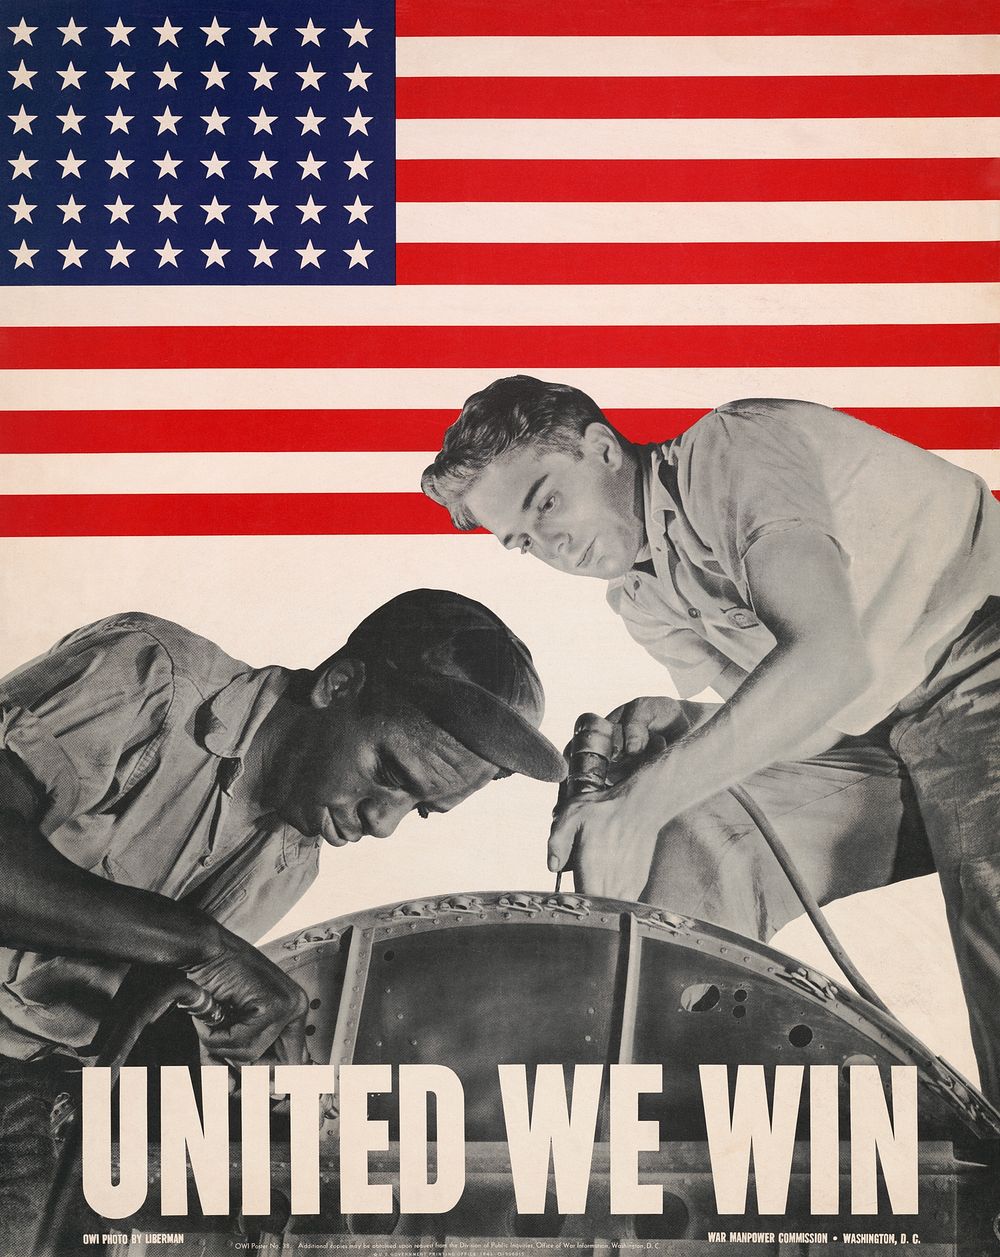 United we win. War Manpower Commission, Washington, D.C. (1943) poster by Howard Liberman. Original public domain image from…